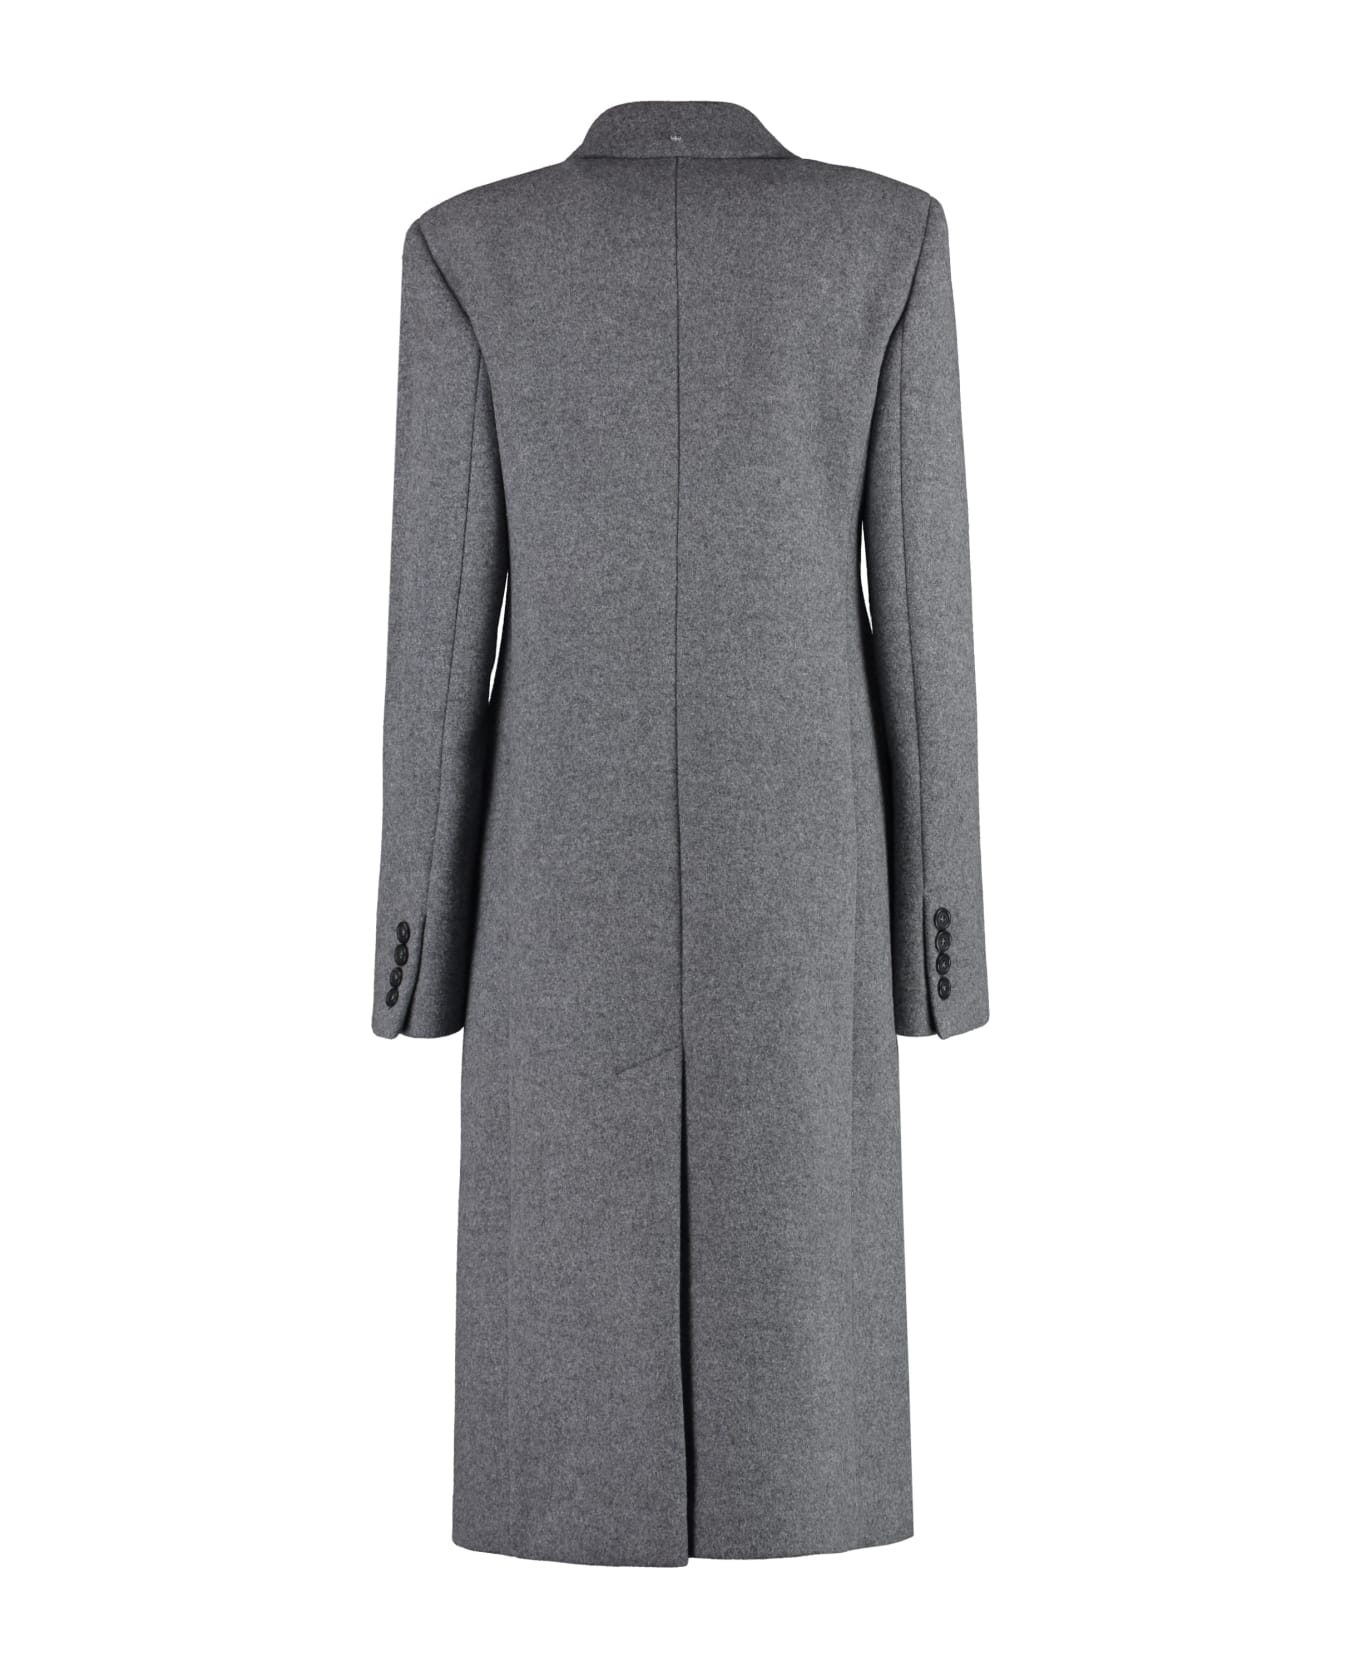 SportMax Adua Double-breasted Wool And Cashmere Coat - grey